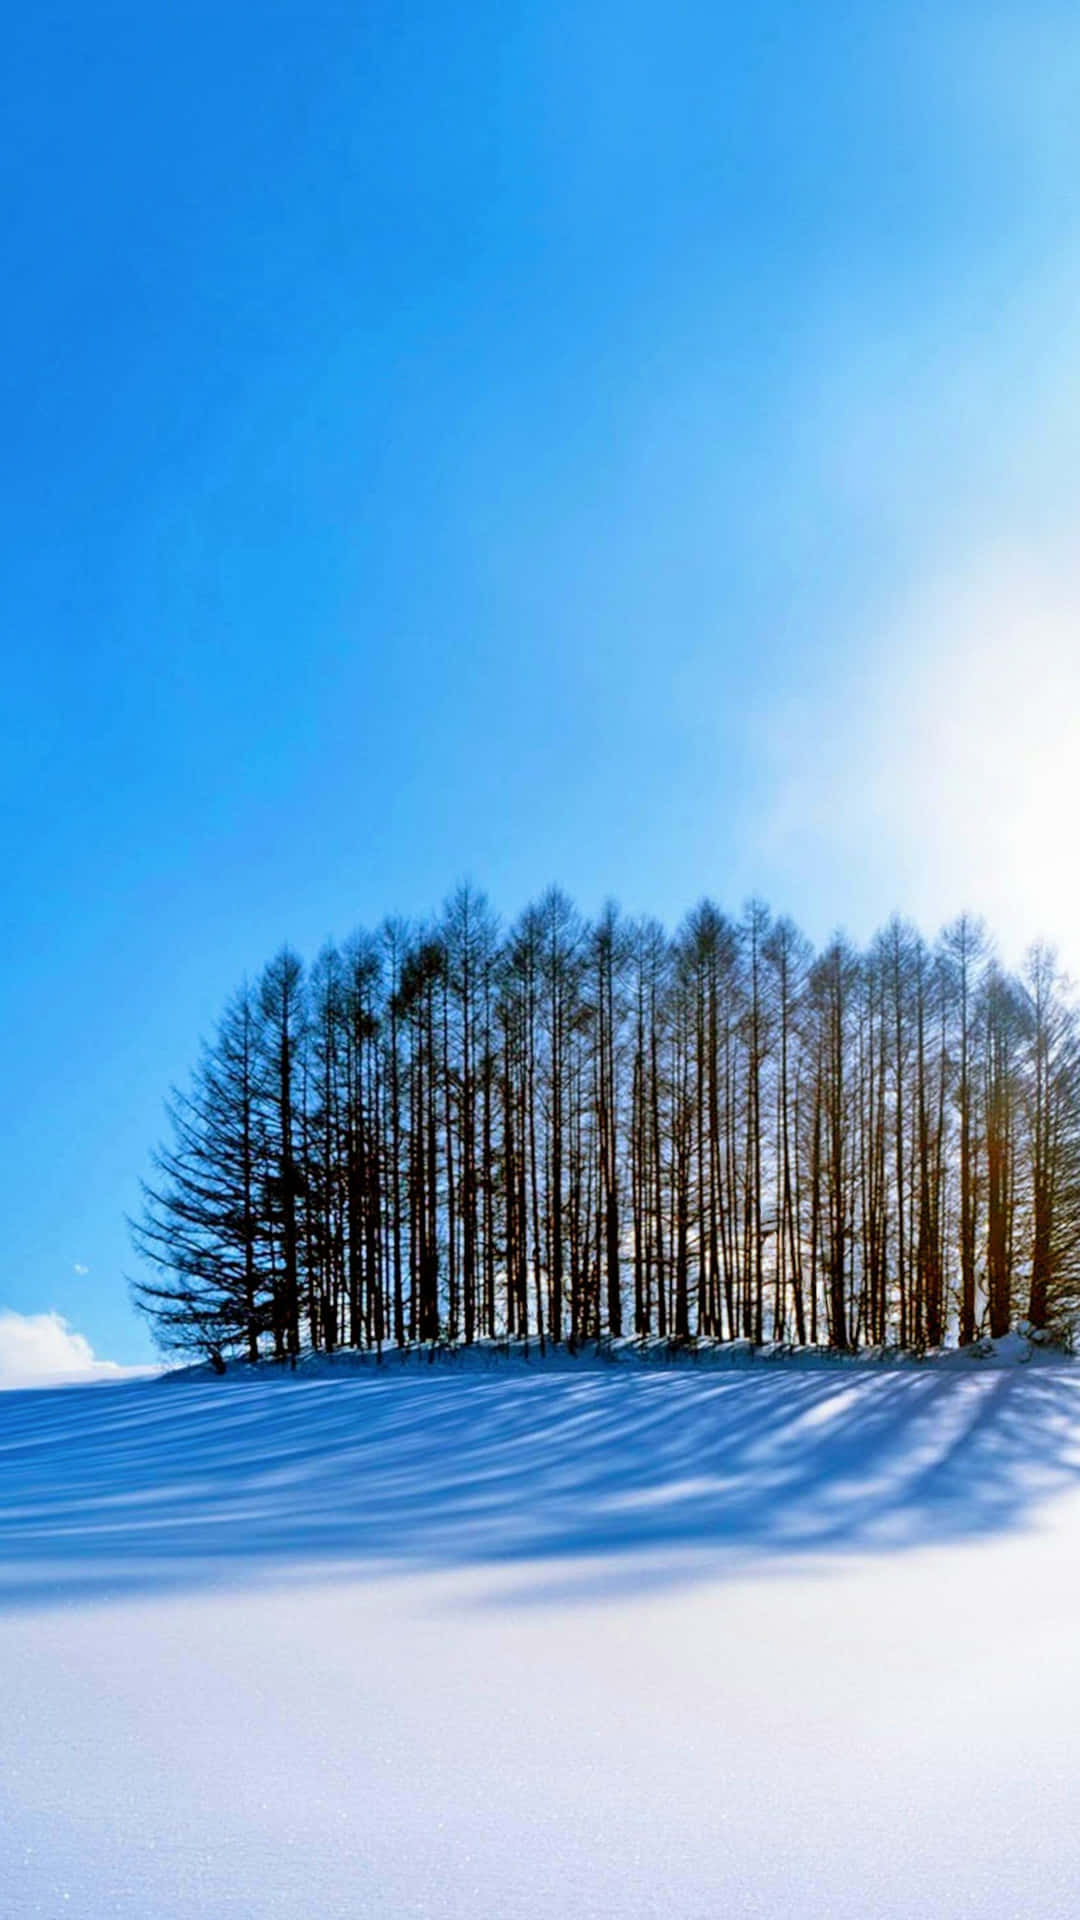 A Snow Covered Hill With Trees In The Background Wallpaper